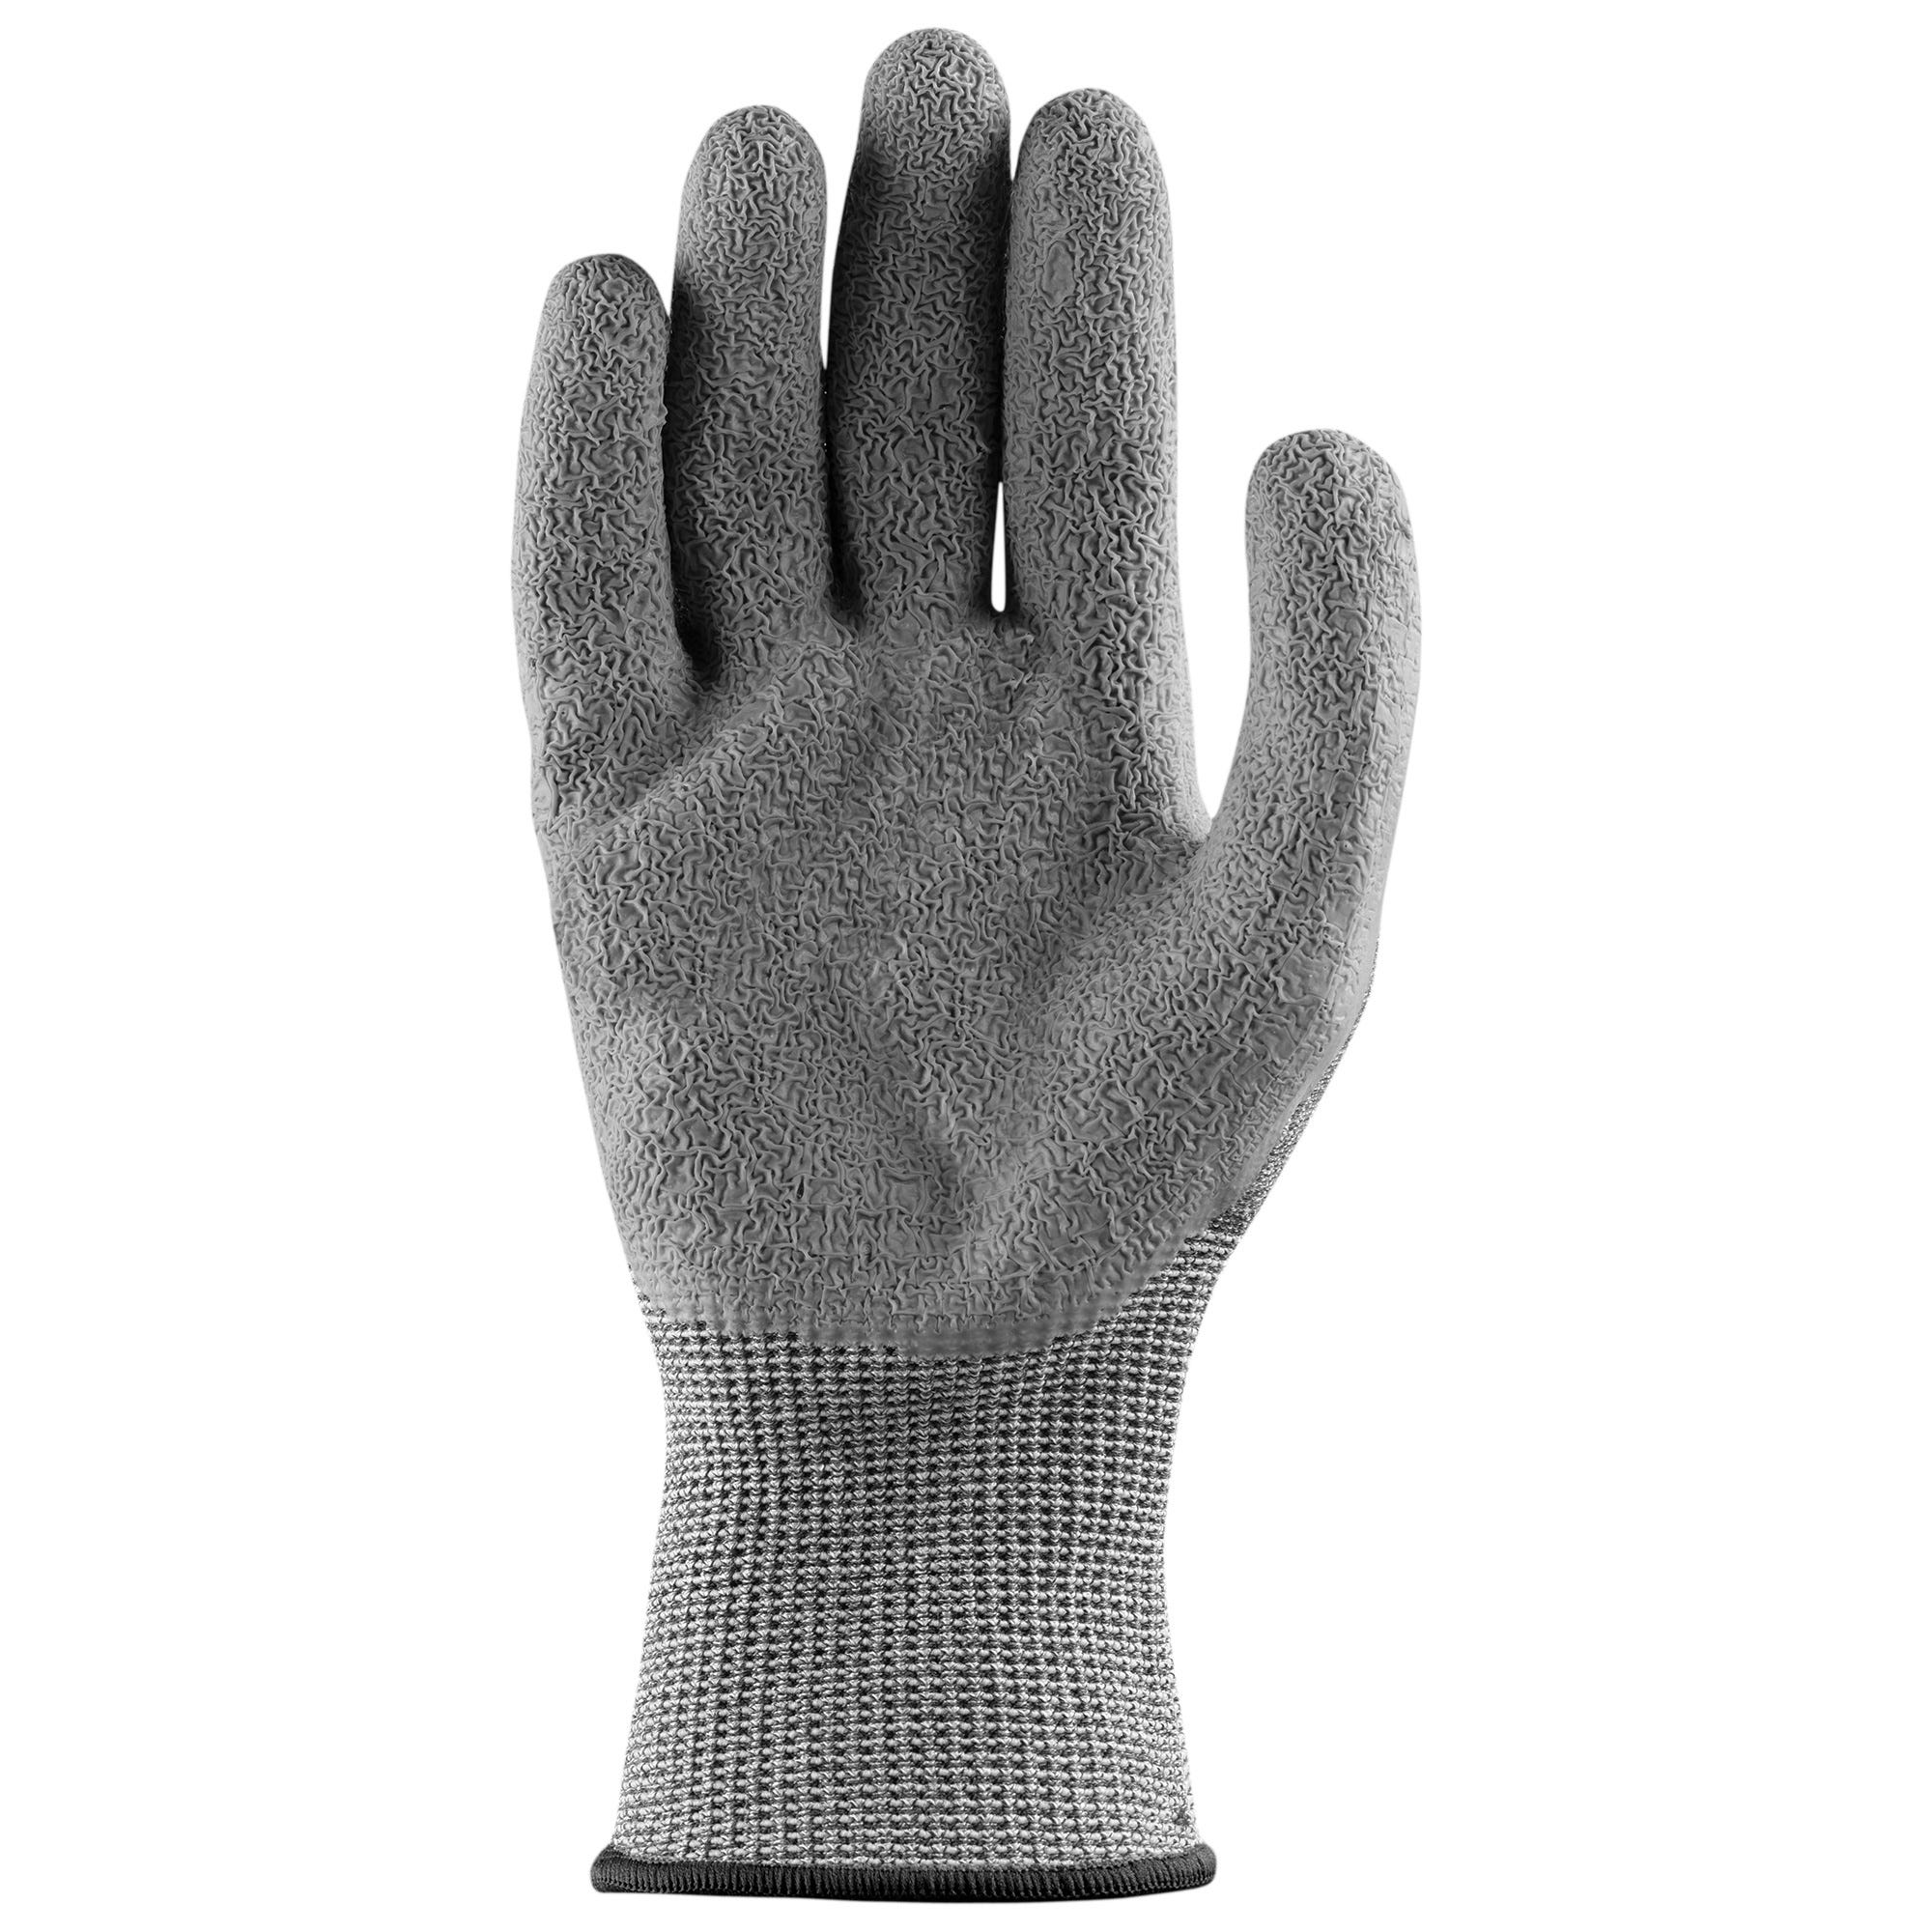 Gants de protection anti coupure LIFT SAFETY CARBONWIRE A7 LATEX CRINKLE XL 1